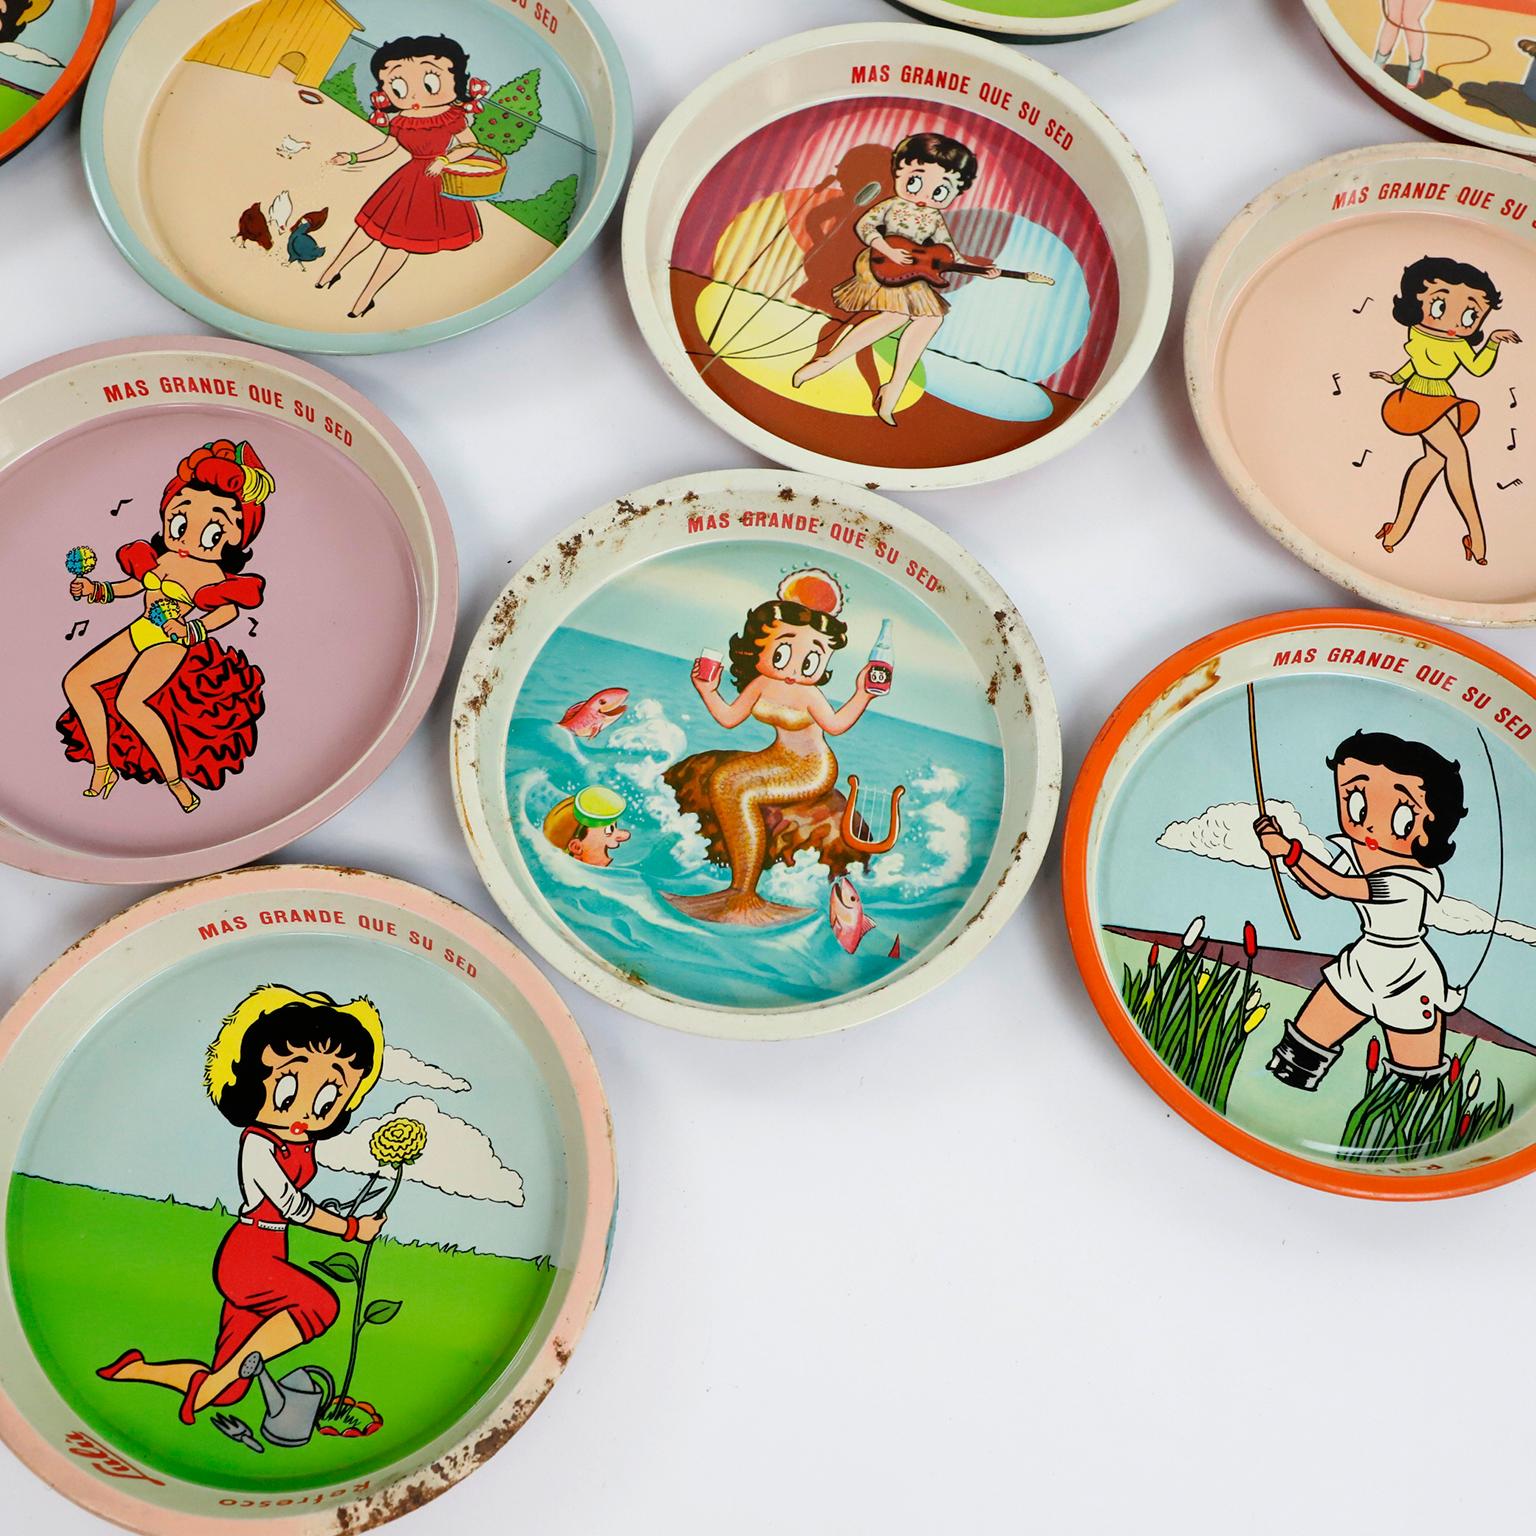 We offer this fantastic collection of 27 Vintage Mexicano Betty Boop lulu steel soda trays.

About 